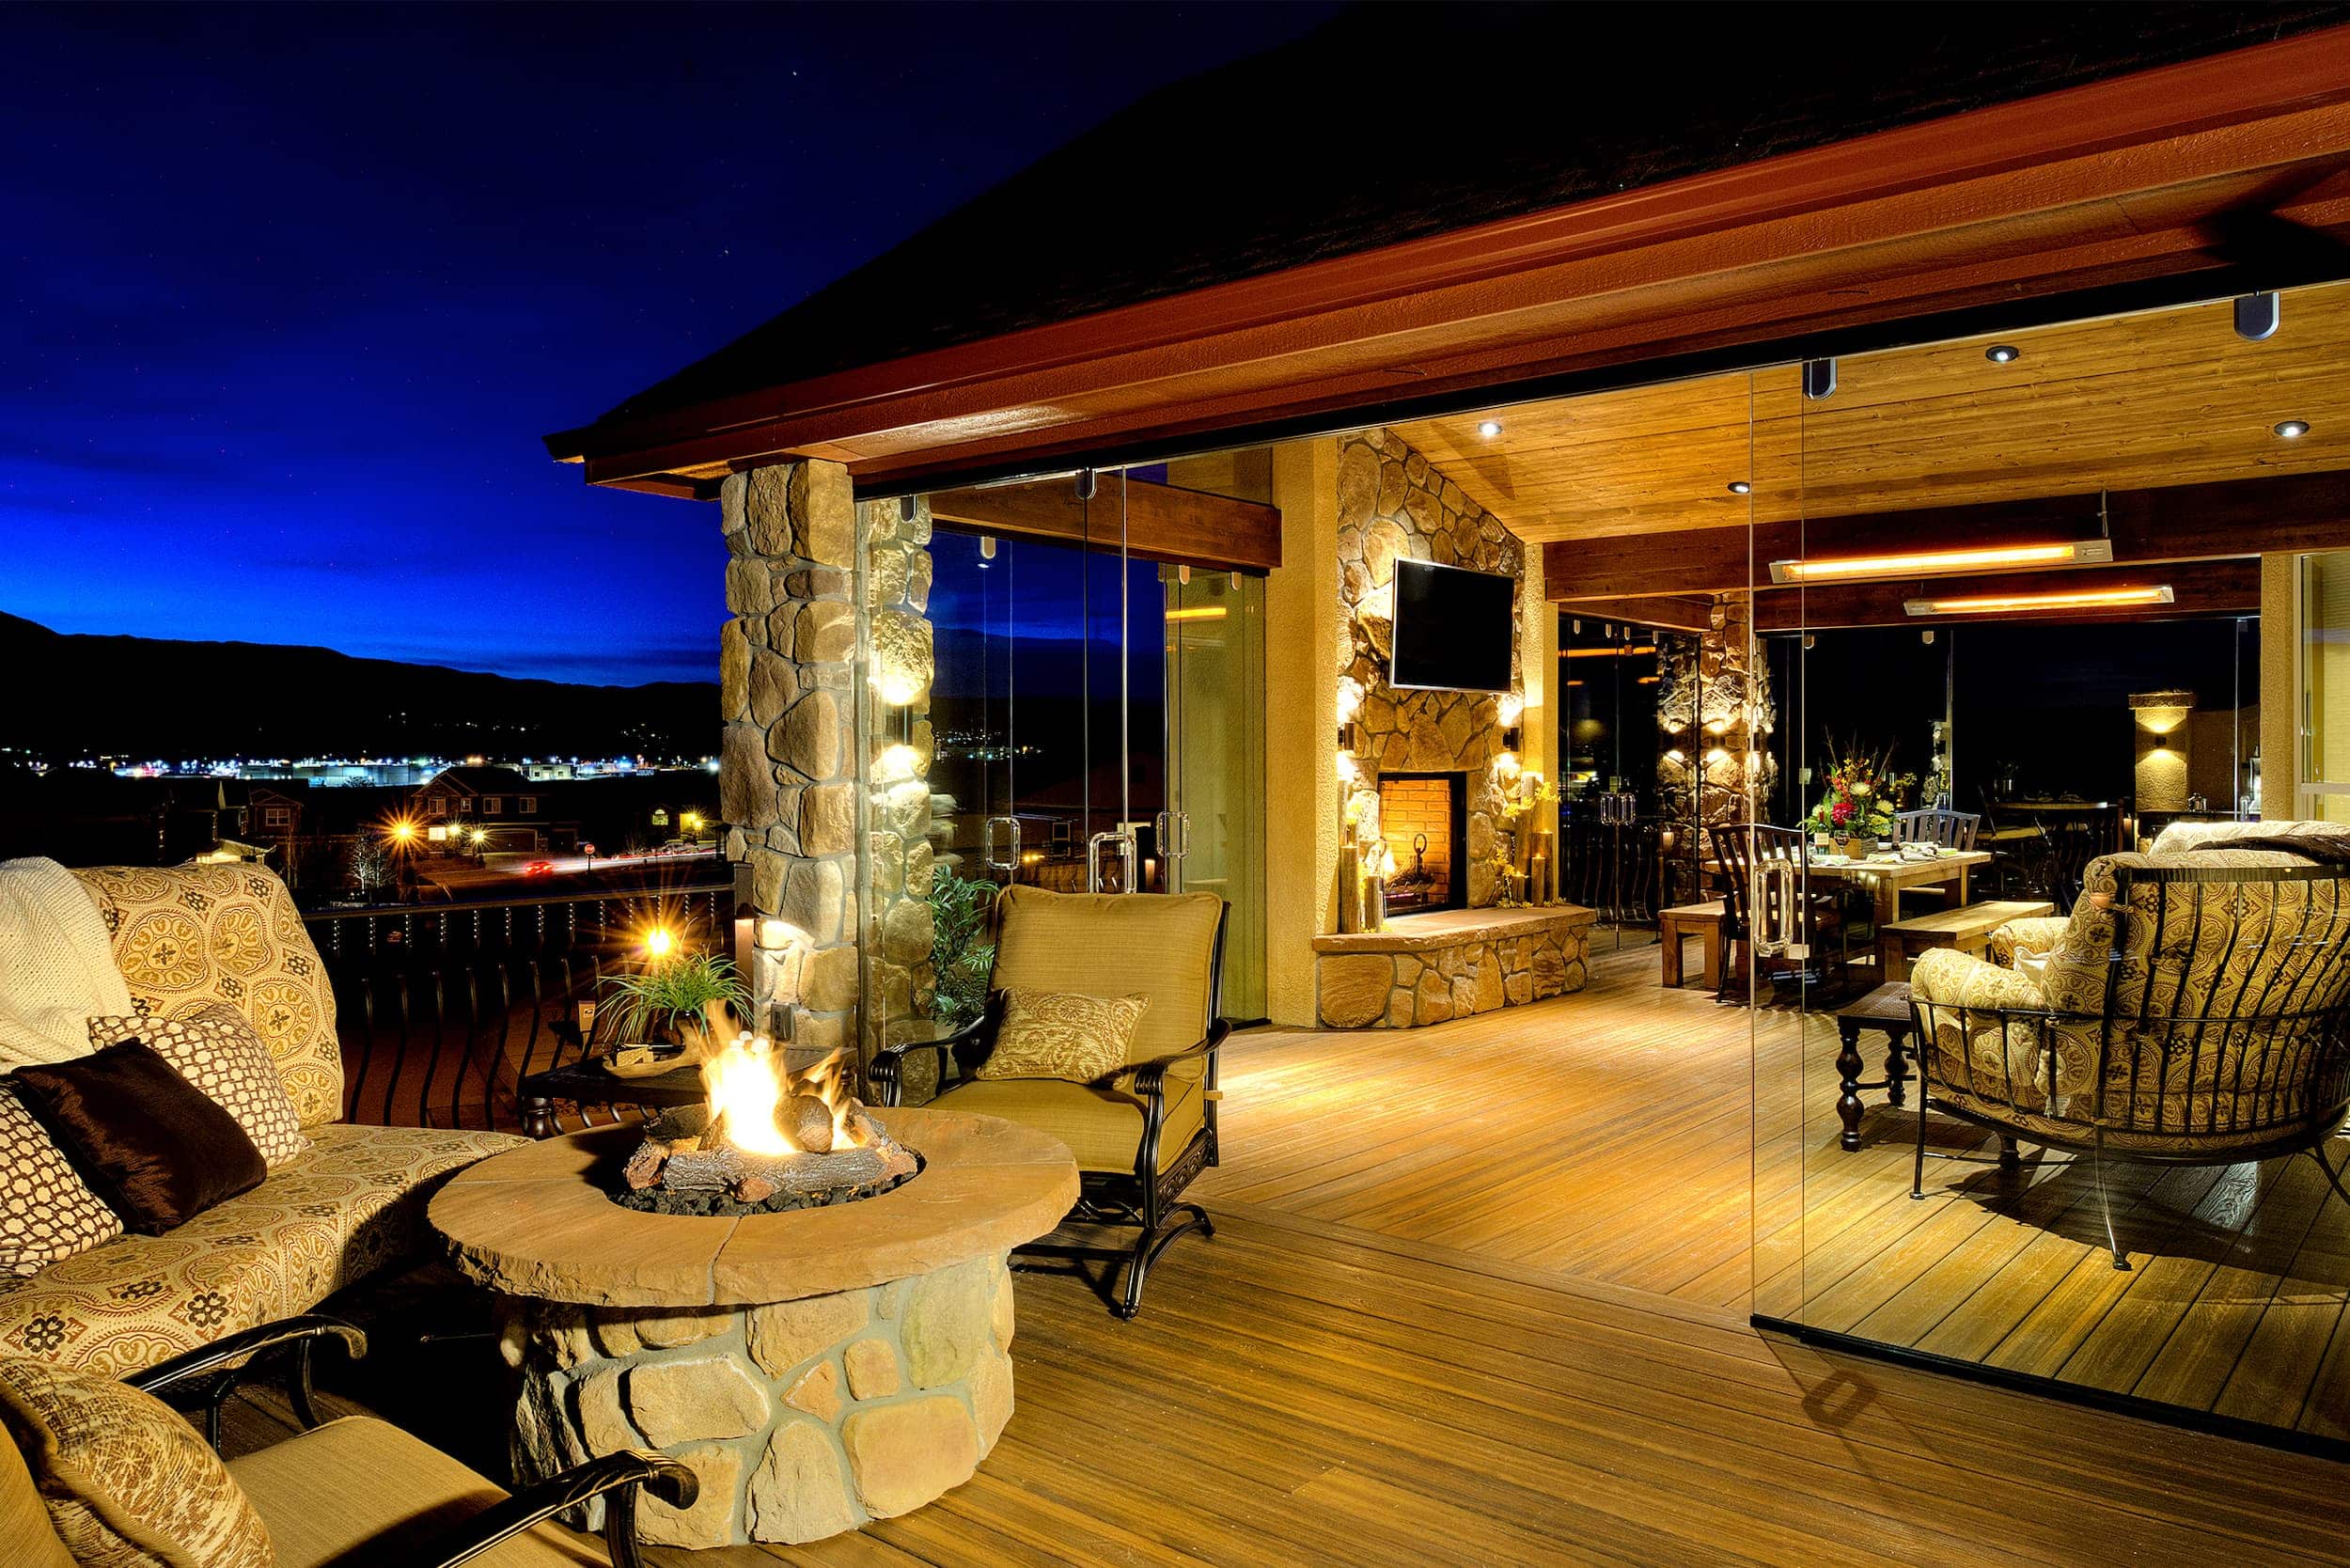 A wooden deck with a fire pit.